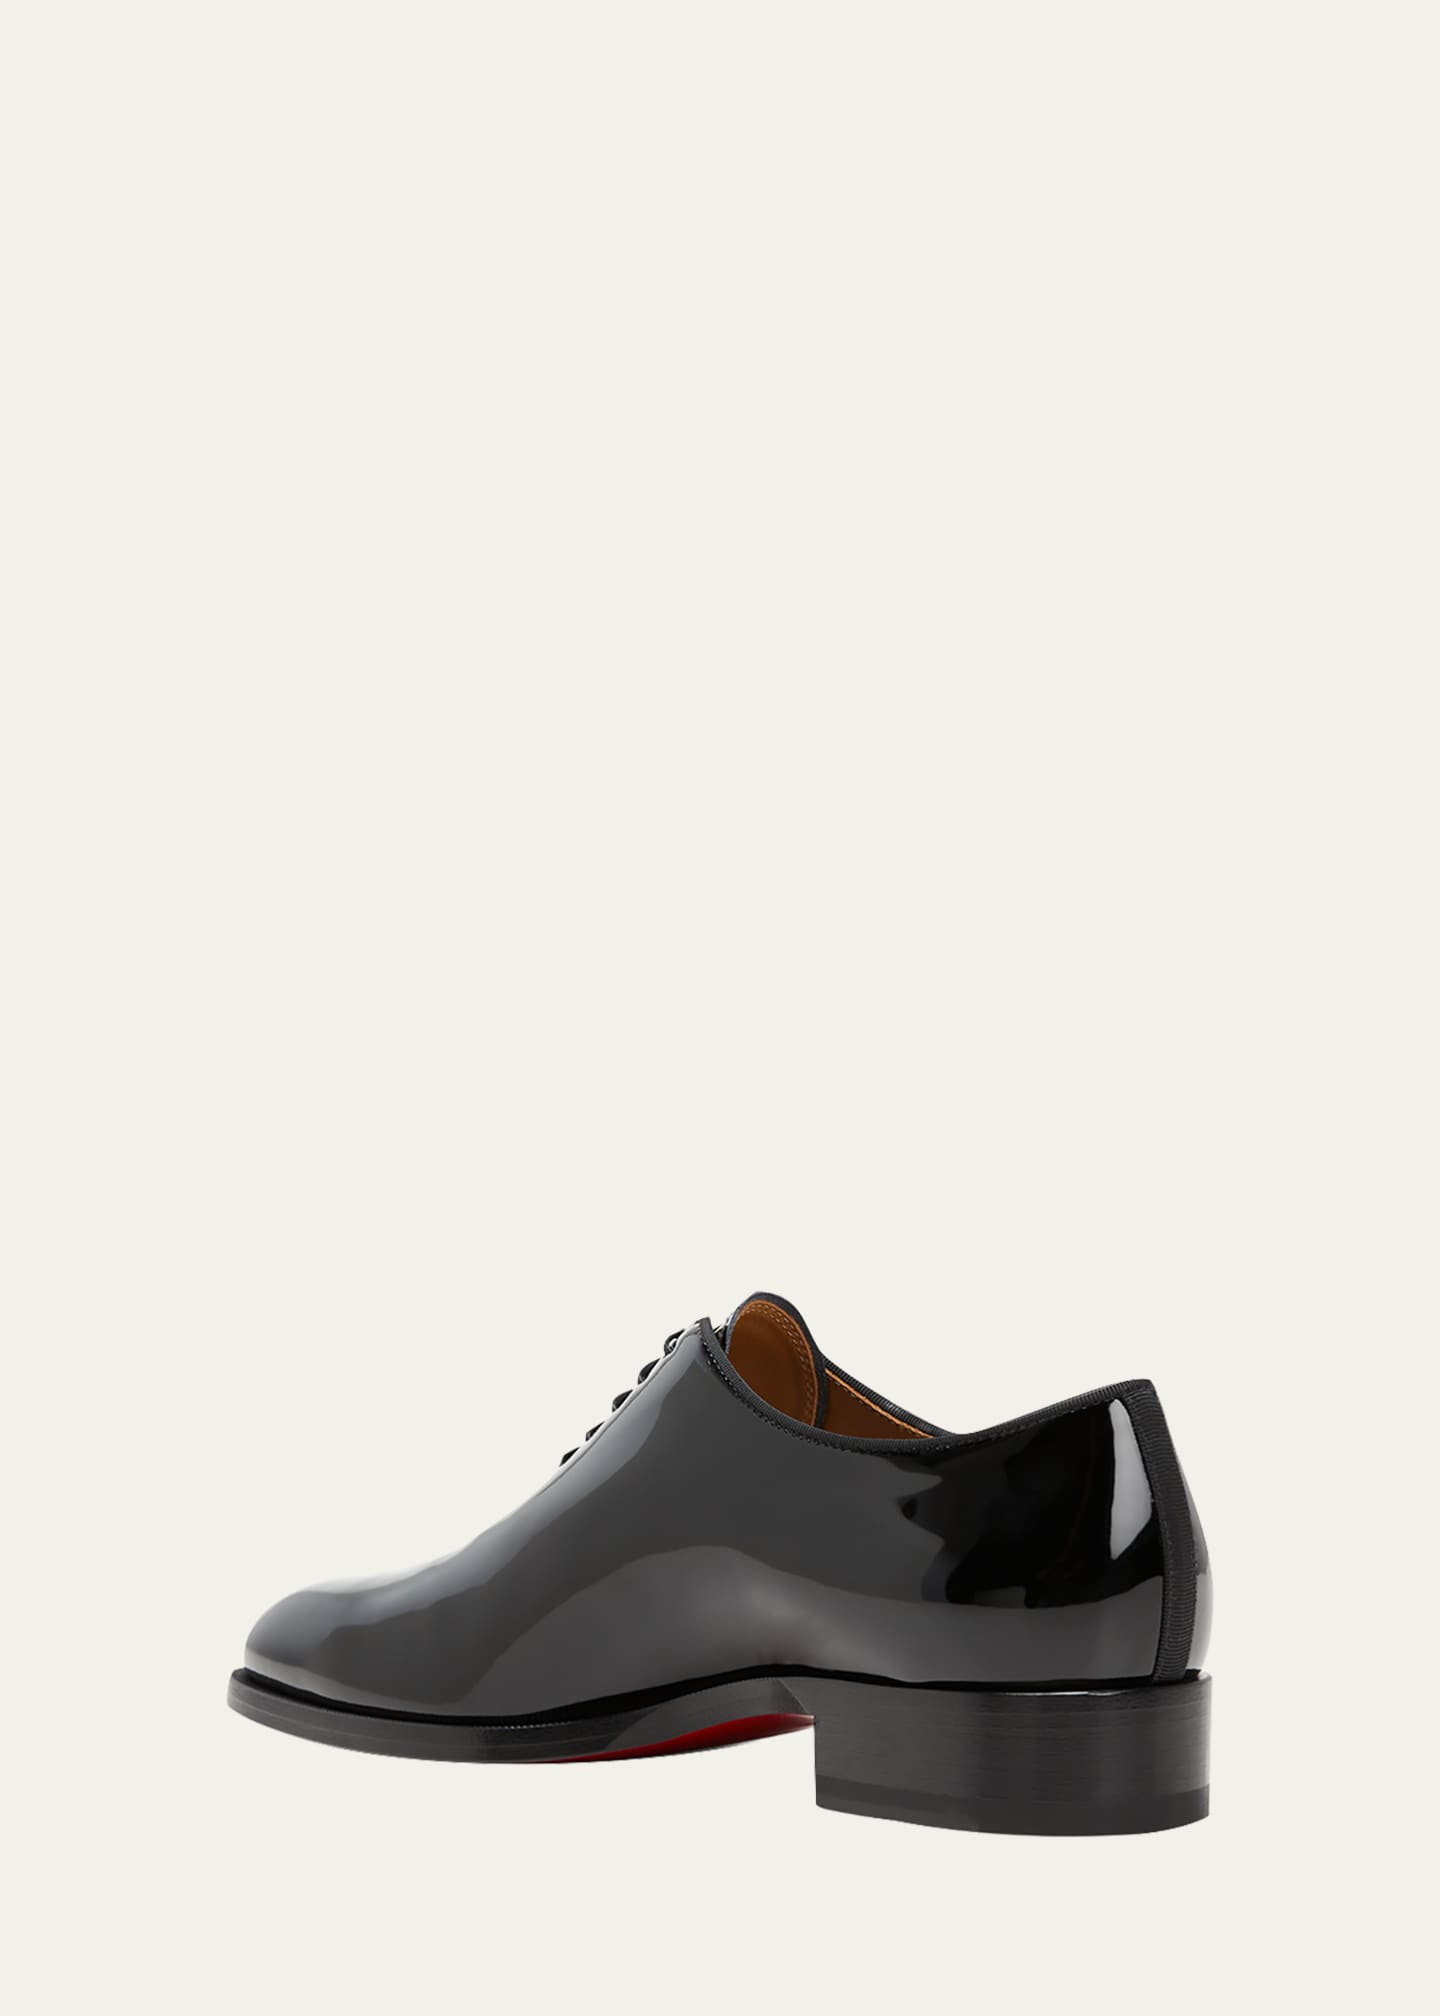 Christian Louboutin Men's Corteo Patent Leather Oxford Shoes - Bergdorf ...